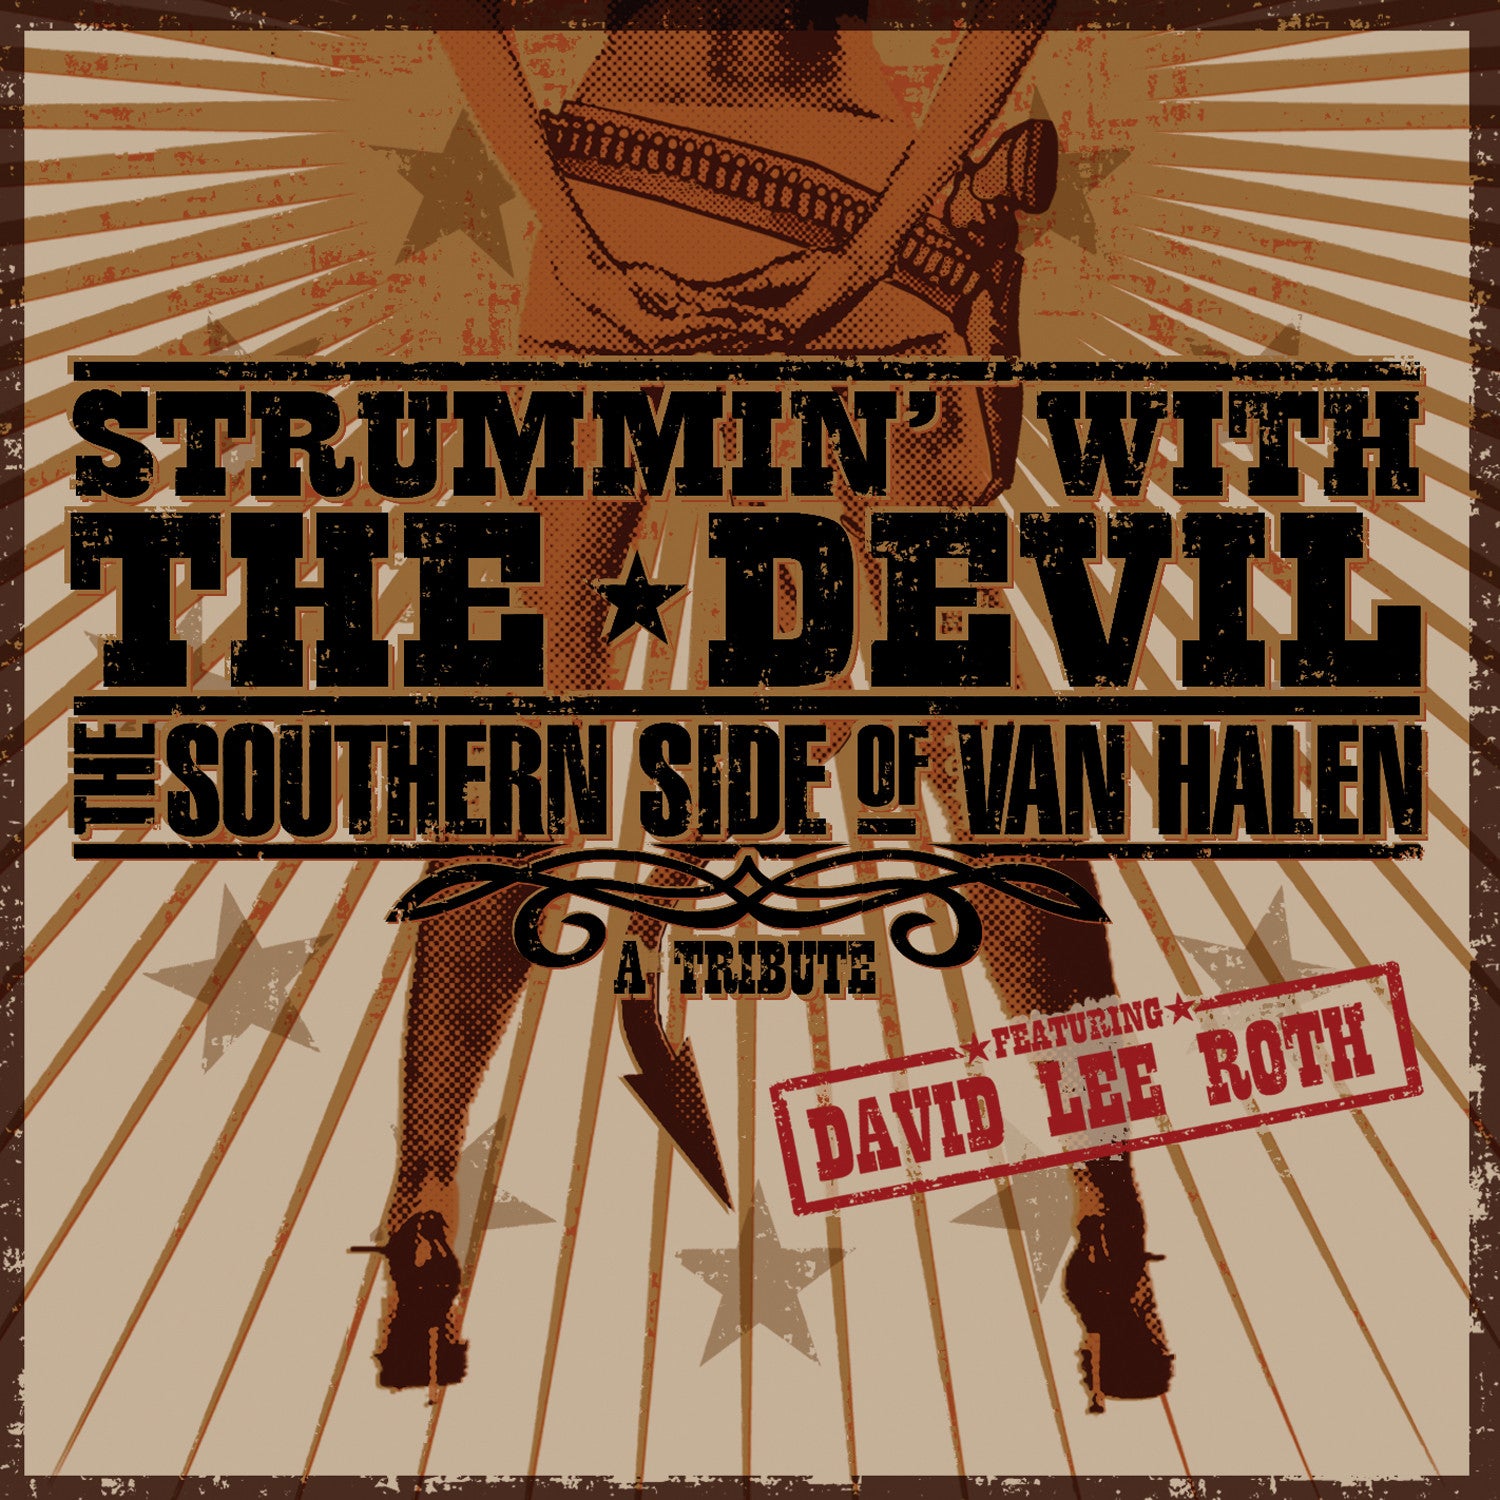 Strummin' With the Devil: The Southern Side of Van Halen - A Tribute Featuring David Lee Roth